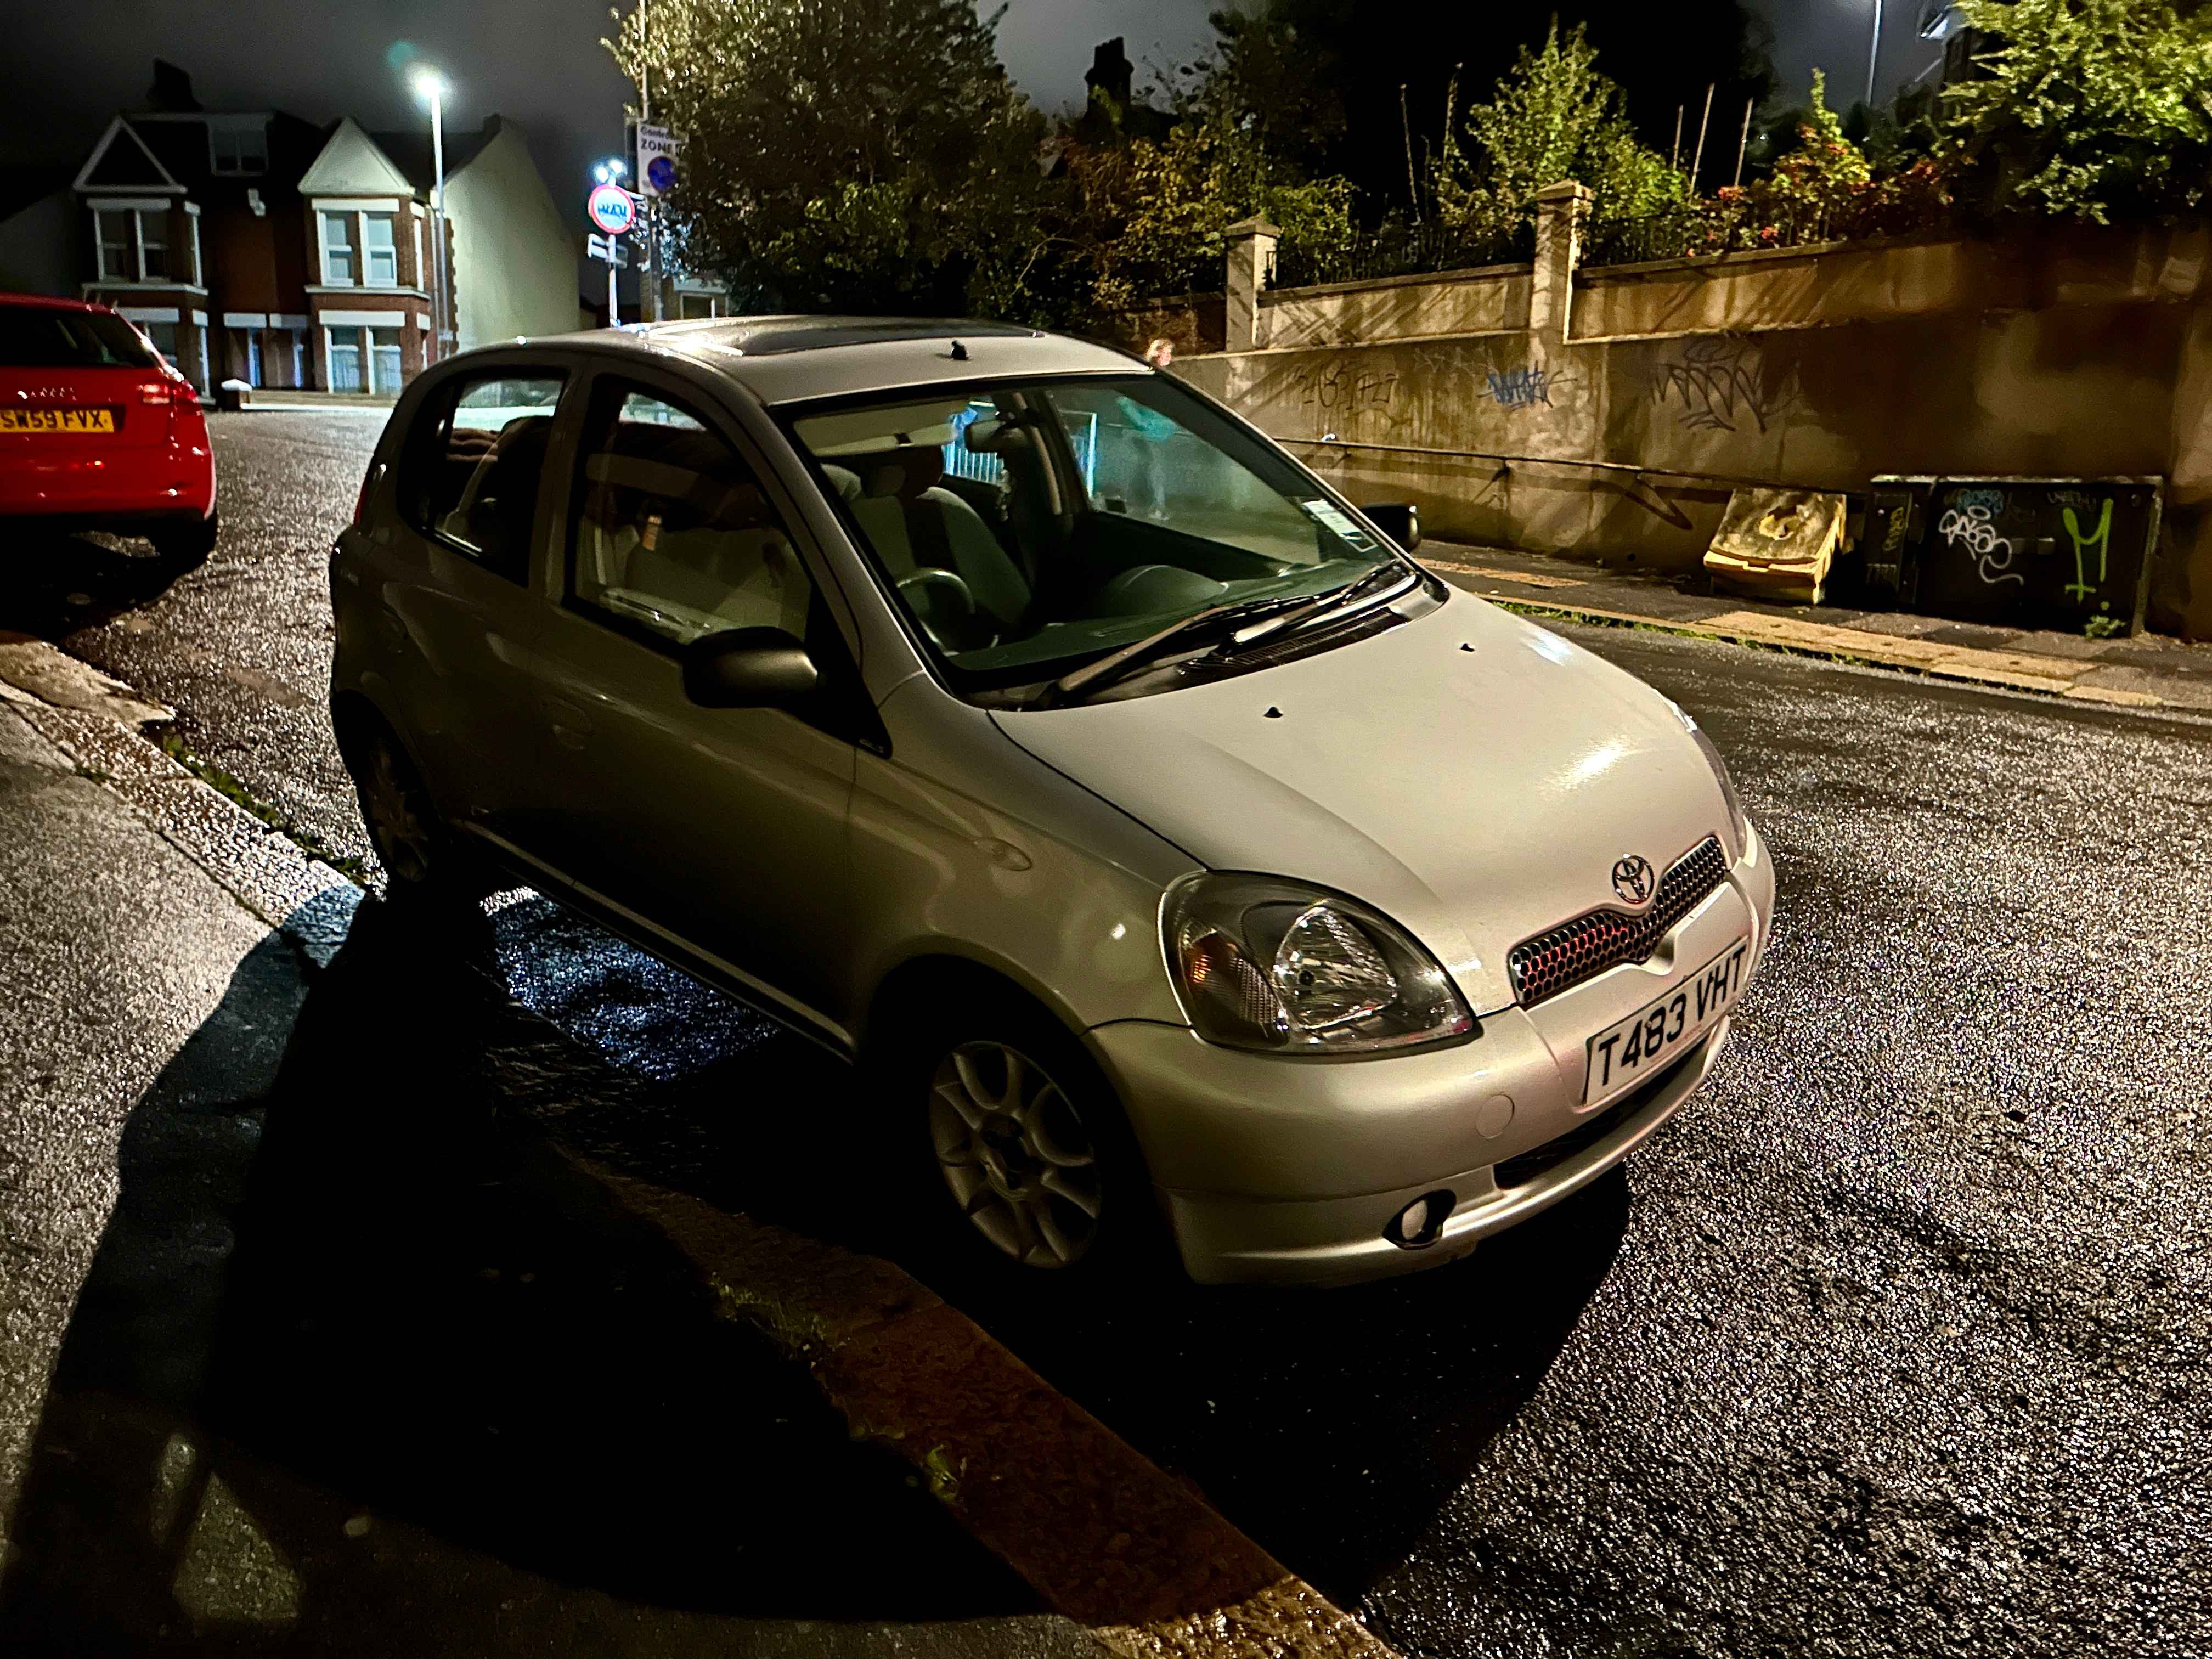 Photograph of T483 VHT - a Silver Toyota Yaris parked in Hollingdean by a non-resident. The tenth of fourteen photographs supplied by the residents of Hollingdean.